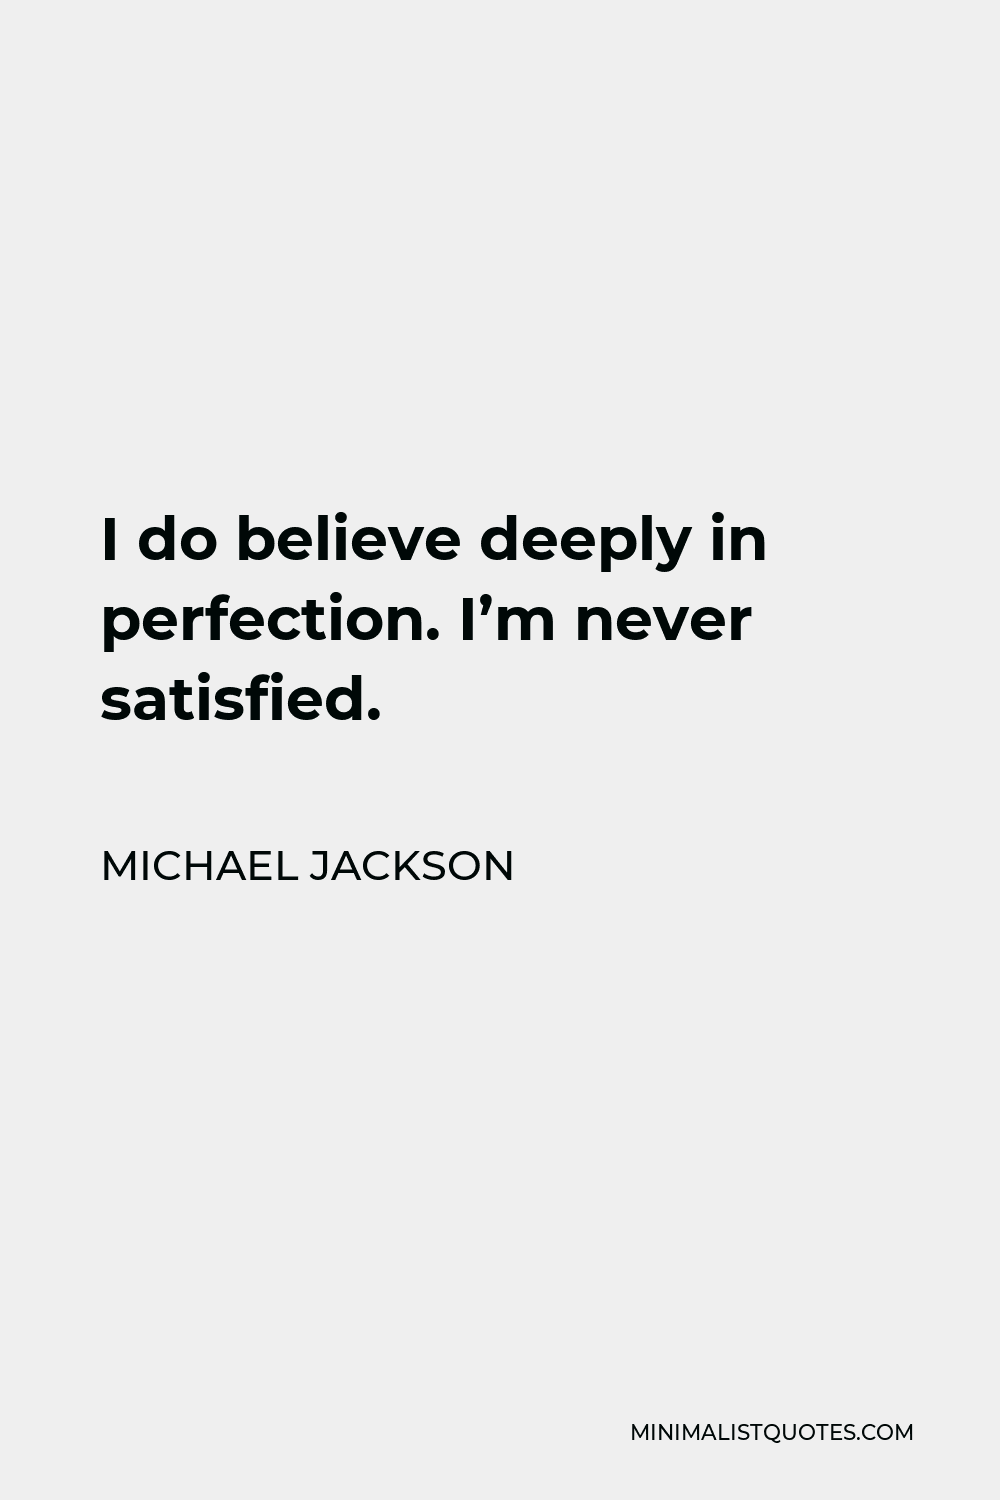 Michael Jackson Quote - I do believe deeply in perfection. I’m never satisfied.